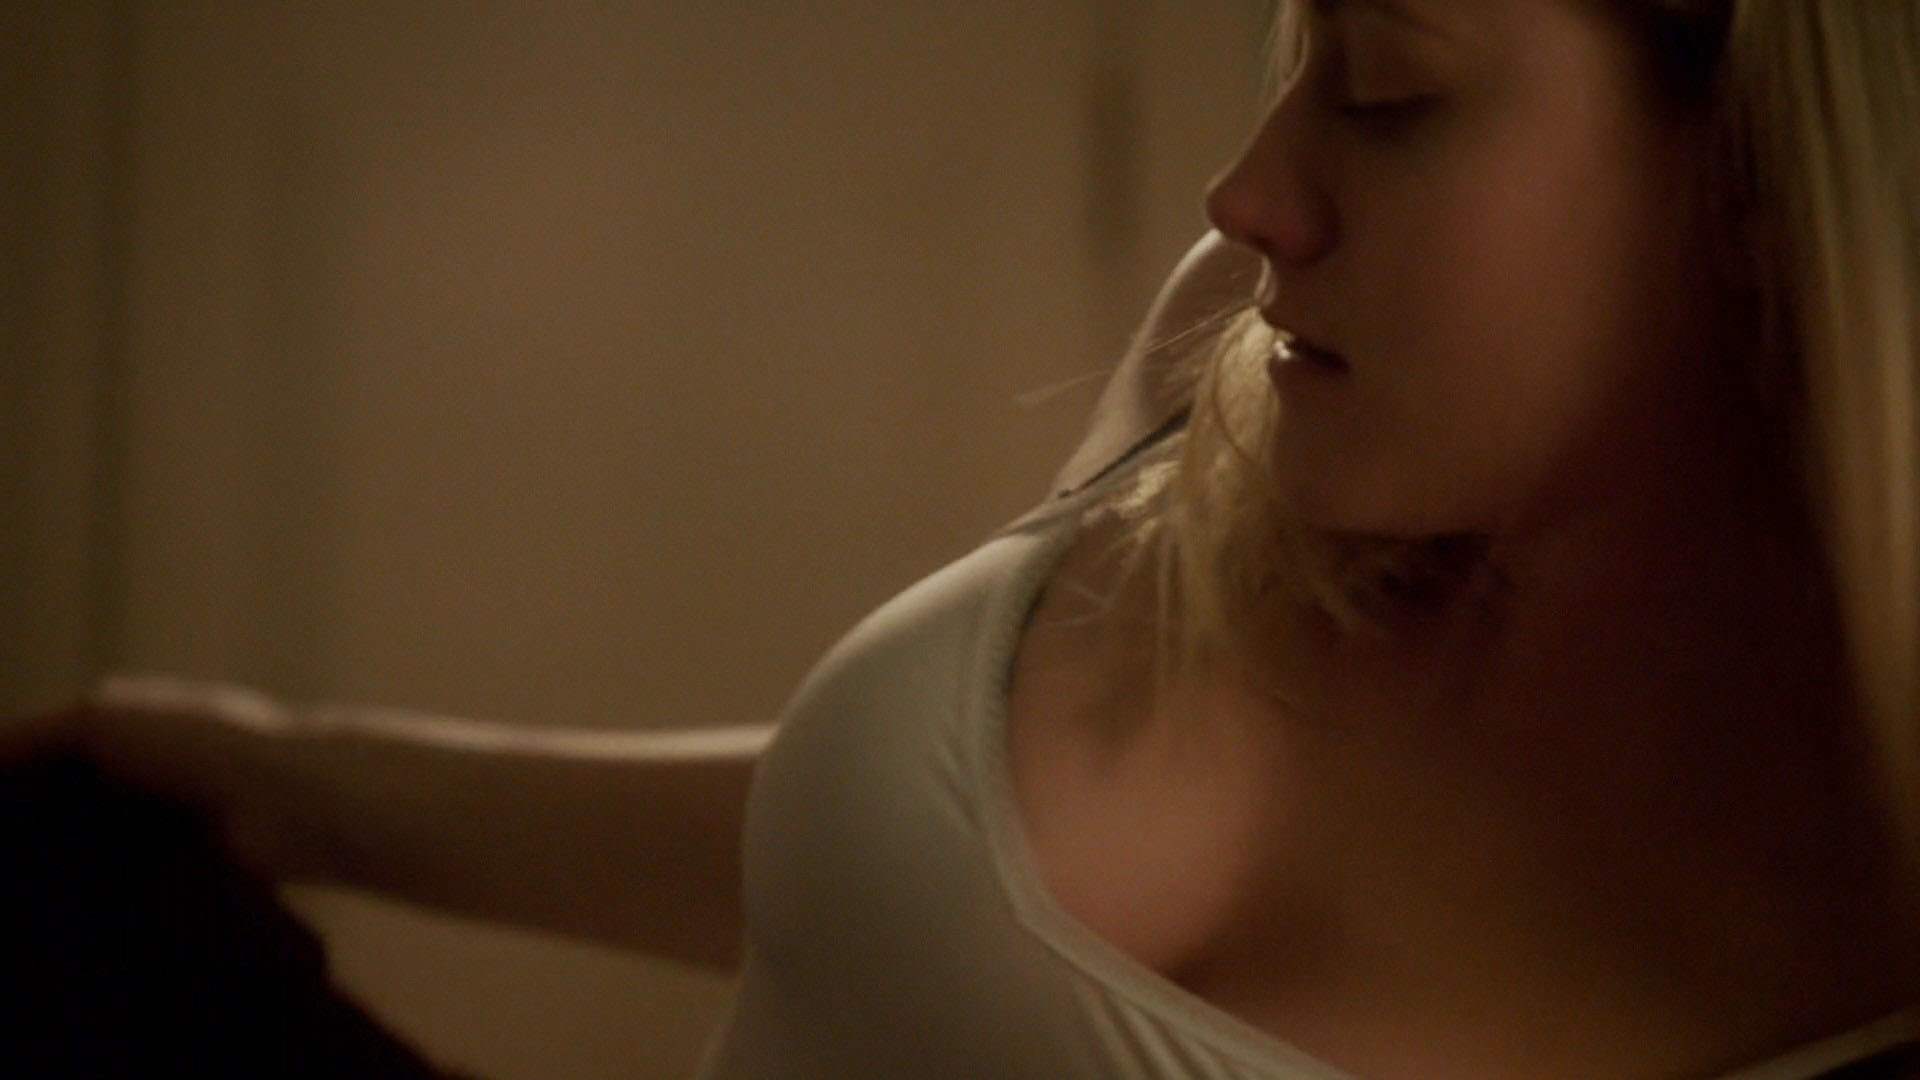 Nsfw olivia taylor dudley 